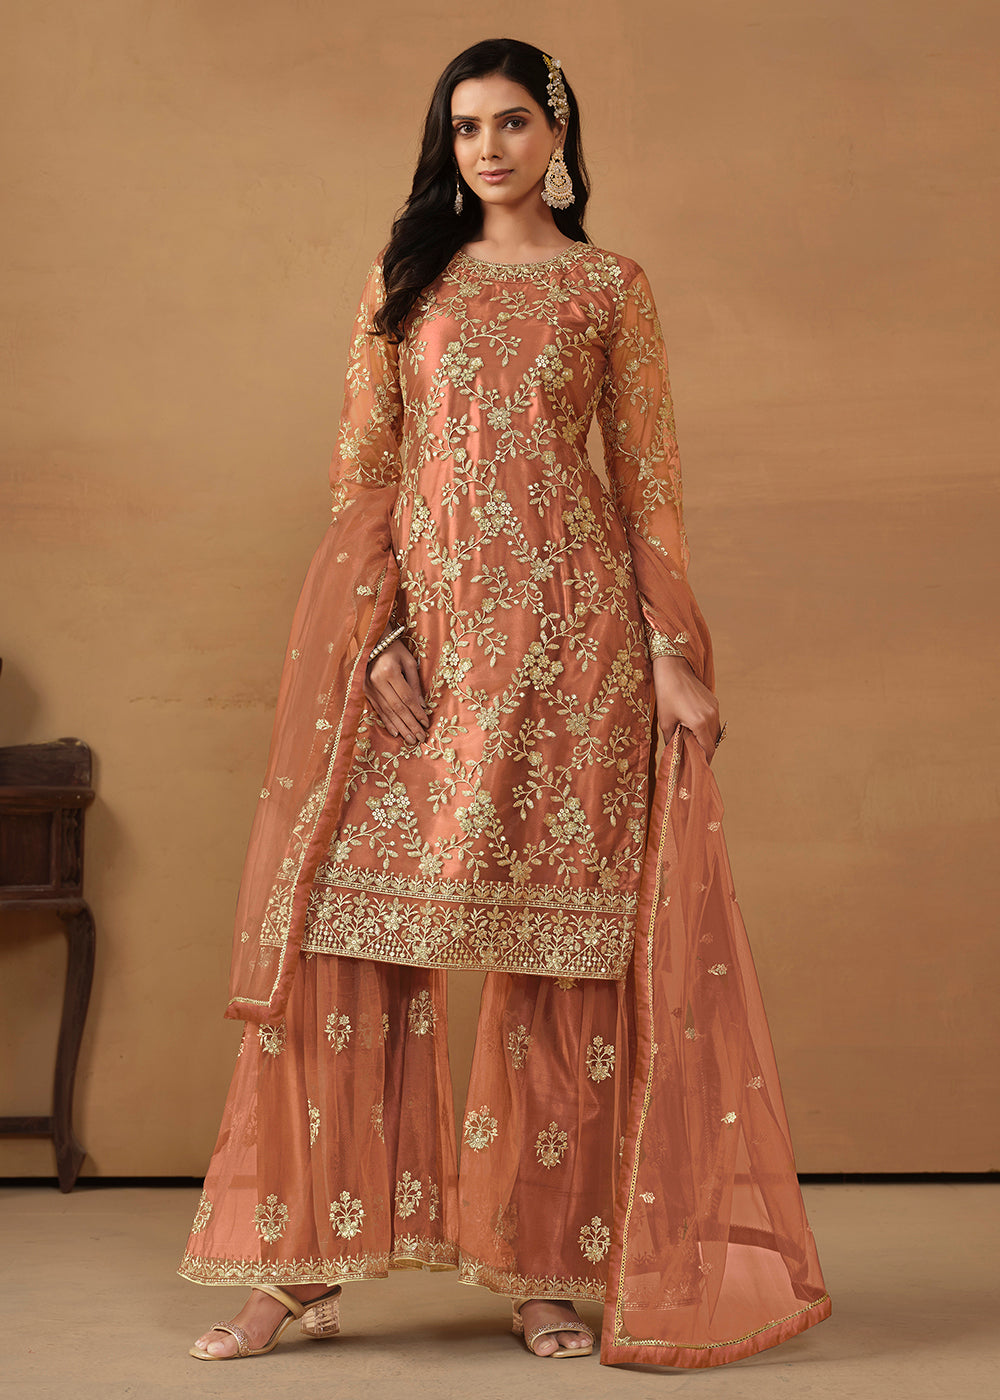 Girl's Gorgeous Party Wear Sharara Suit - db21893